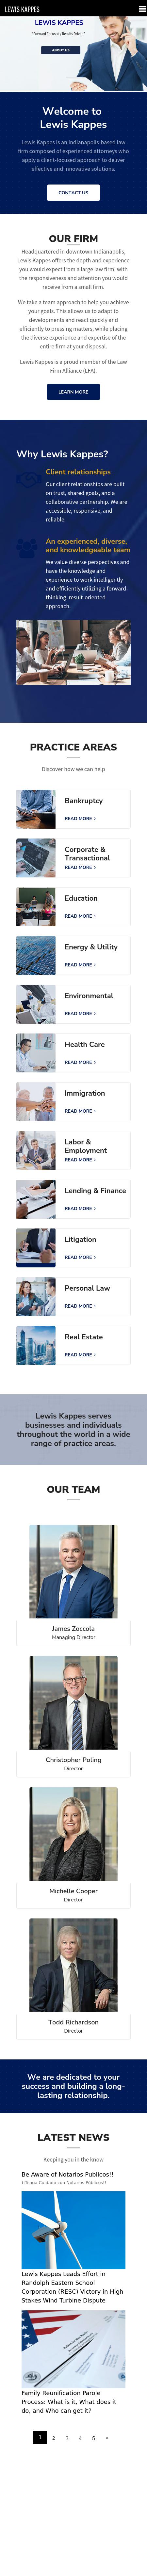 Lewis & Kappes - Indianapolis IN Lawyers